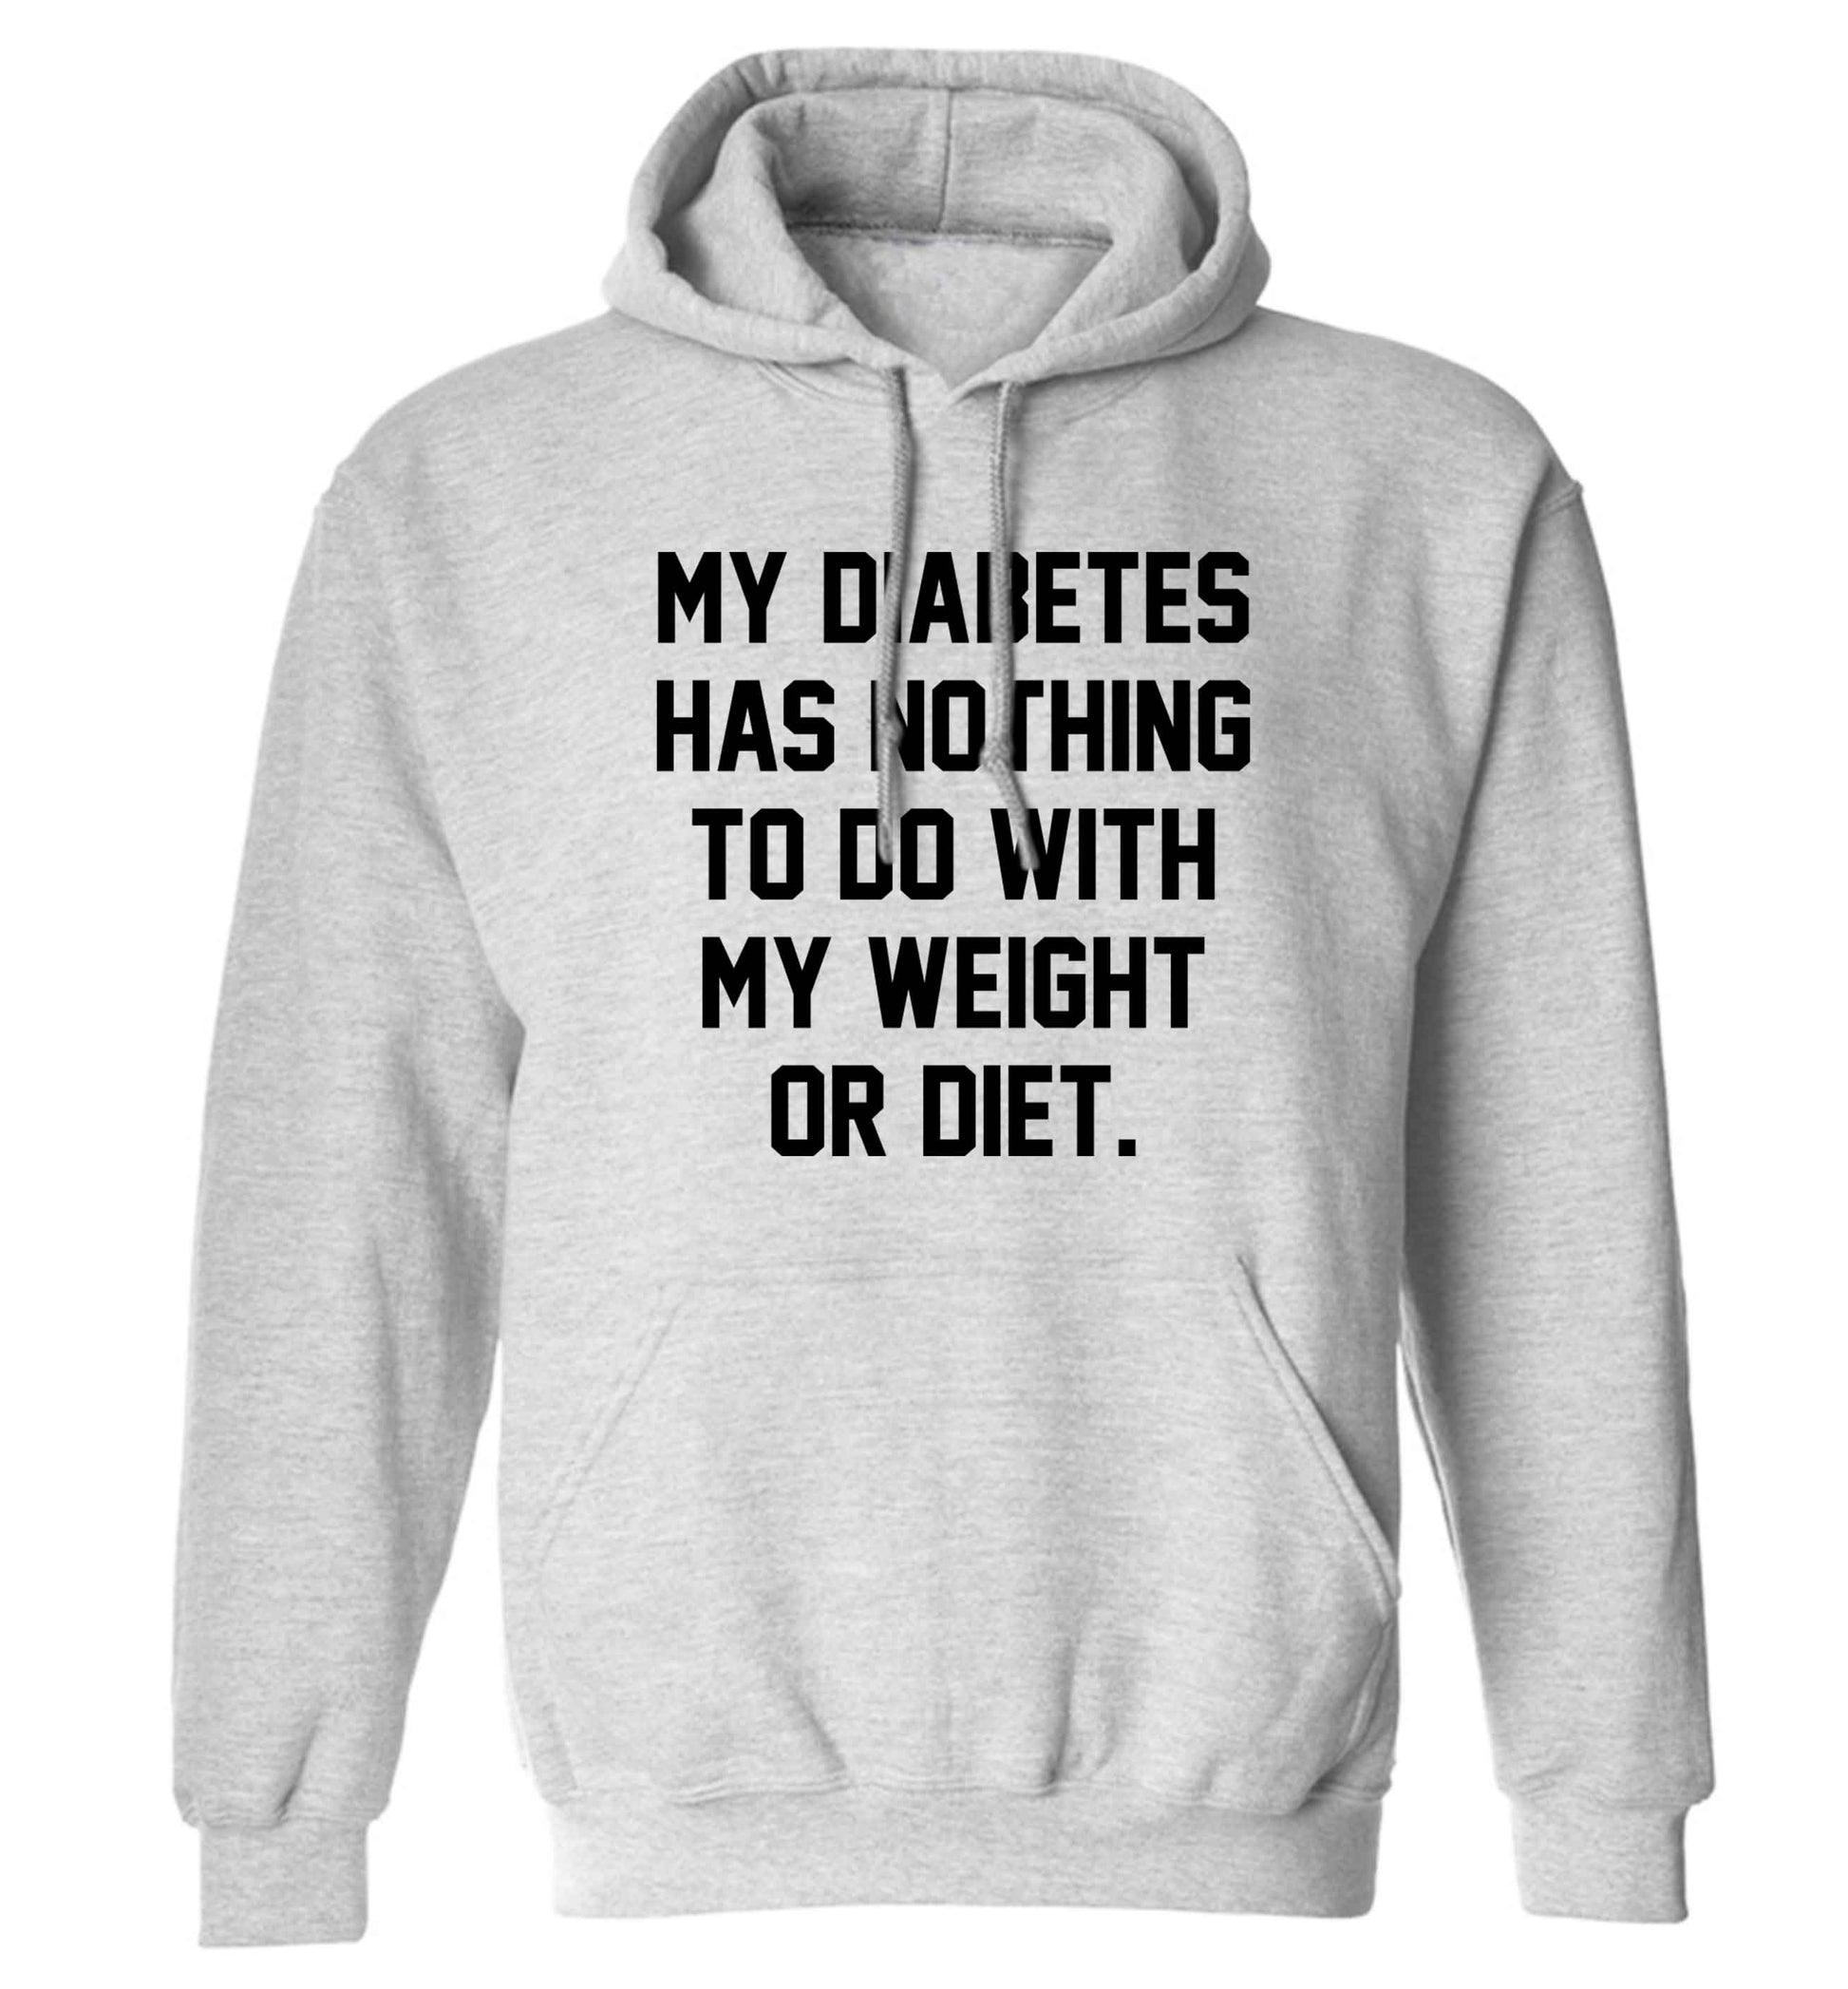 My diabetes has nothing to do with my weight or diet adults unisex grey hoodie 2XL